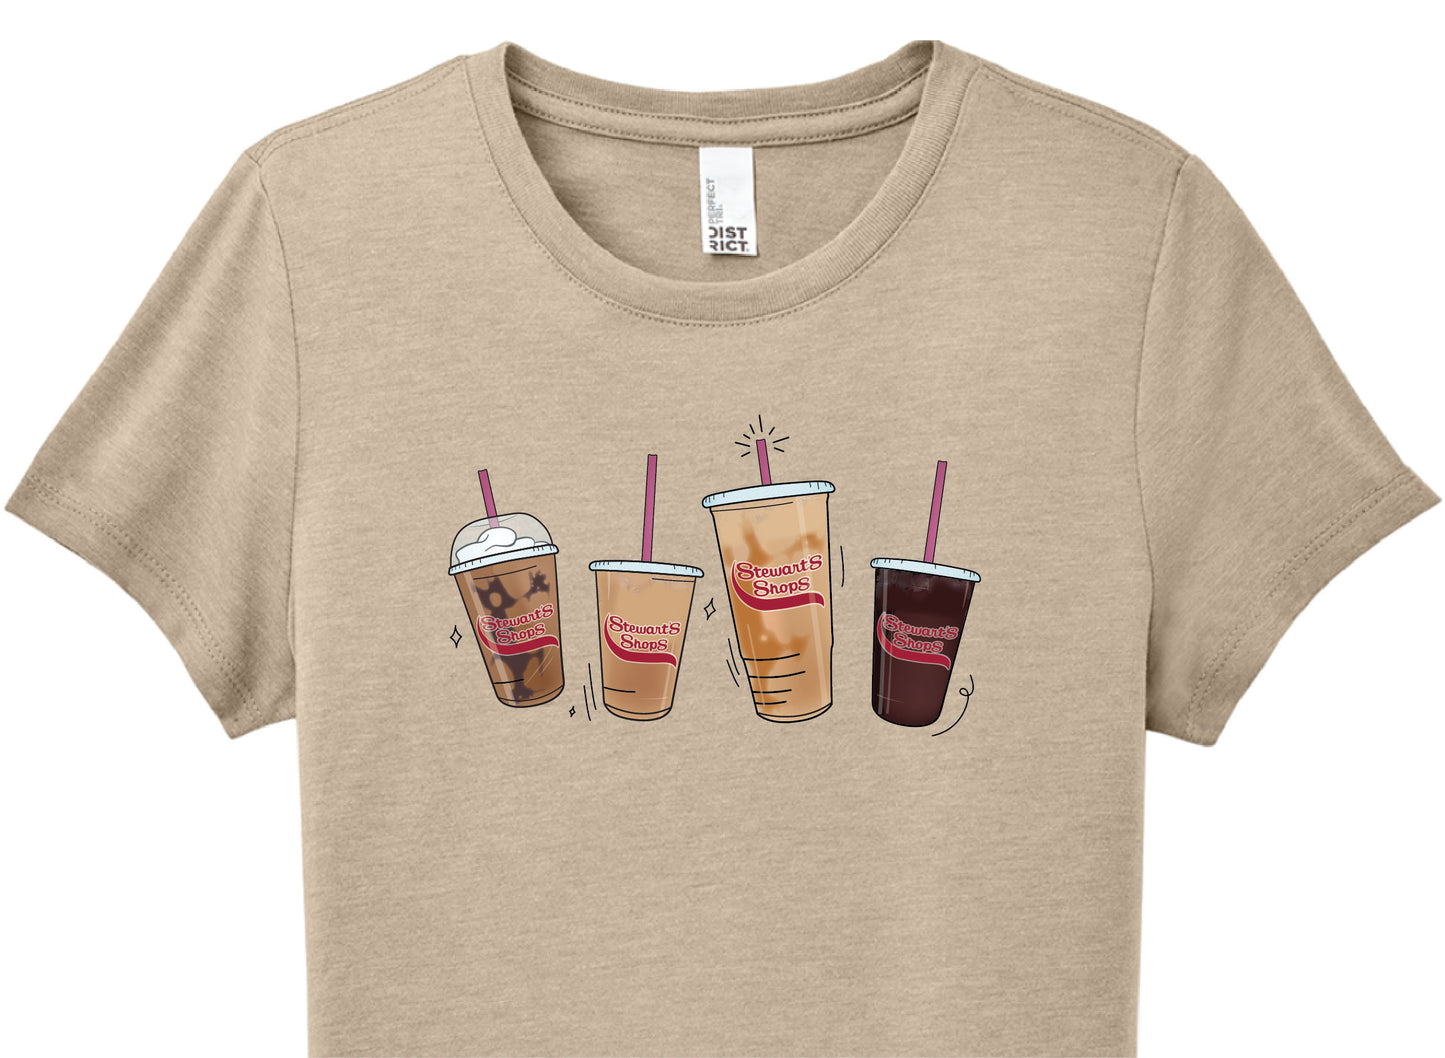 Tan tshirt with 4 stewarts iced coffees featured on the front close shot to show details